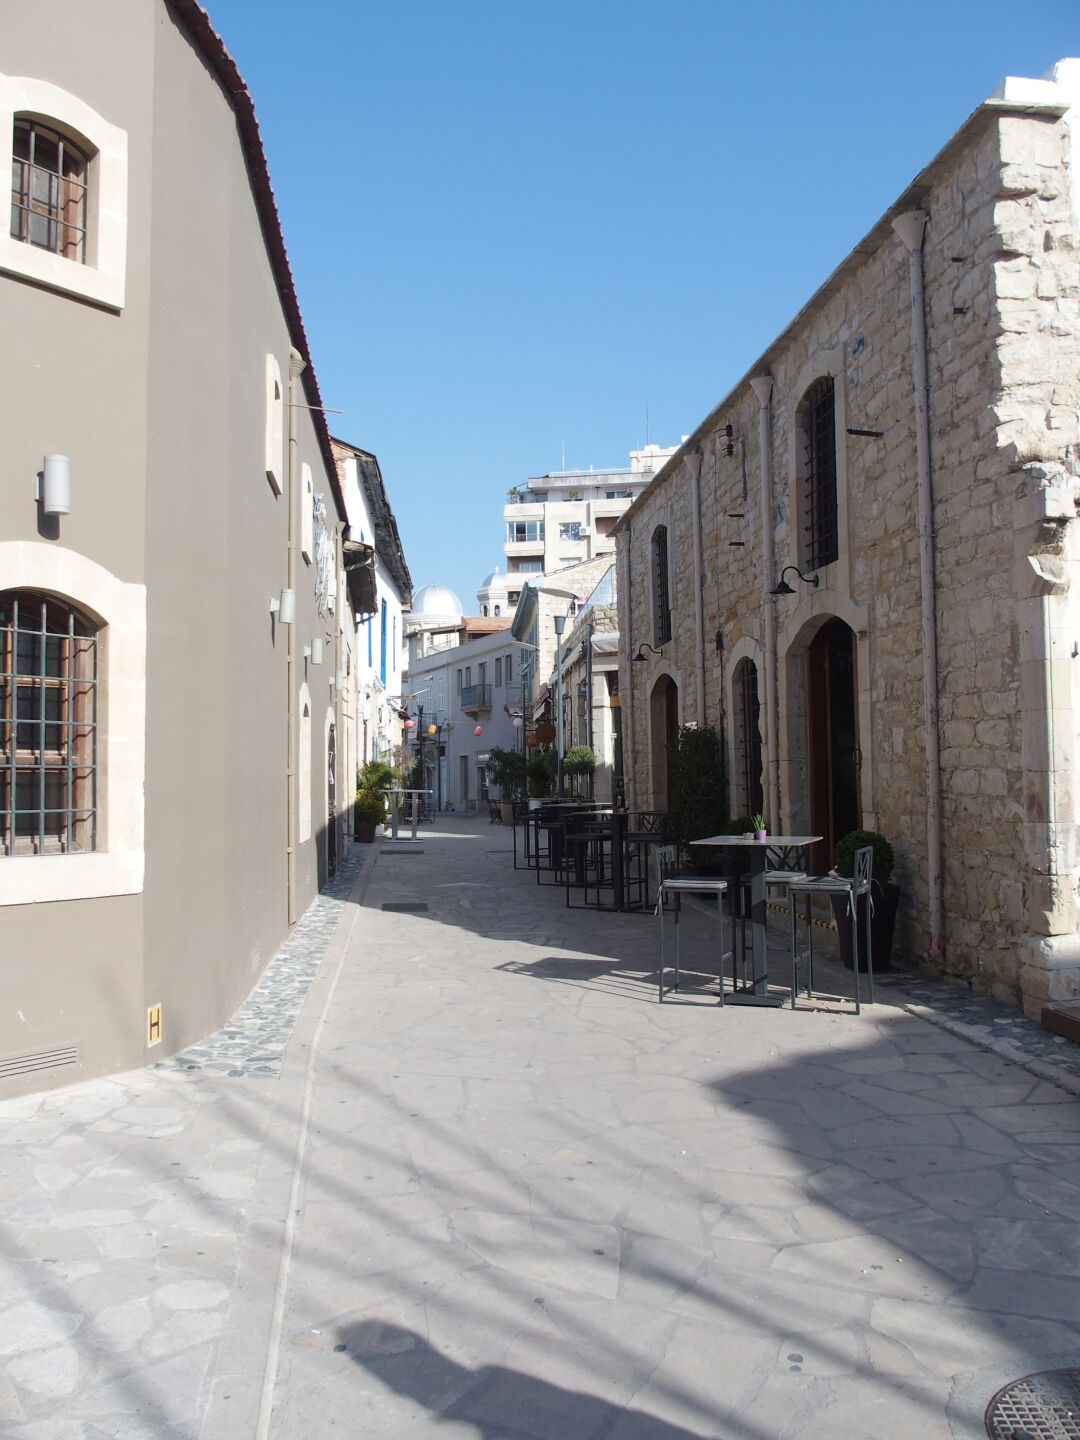 Because of the public holiday on Christmas, downtown Limassol was more or less deserted.